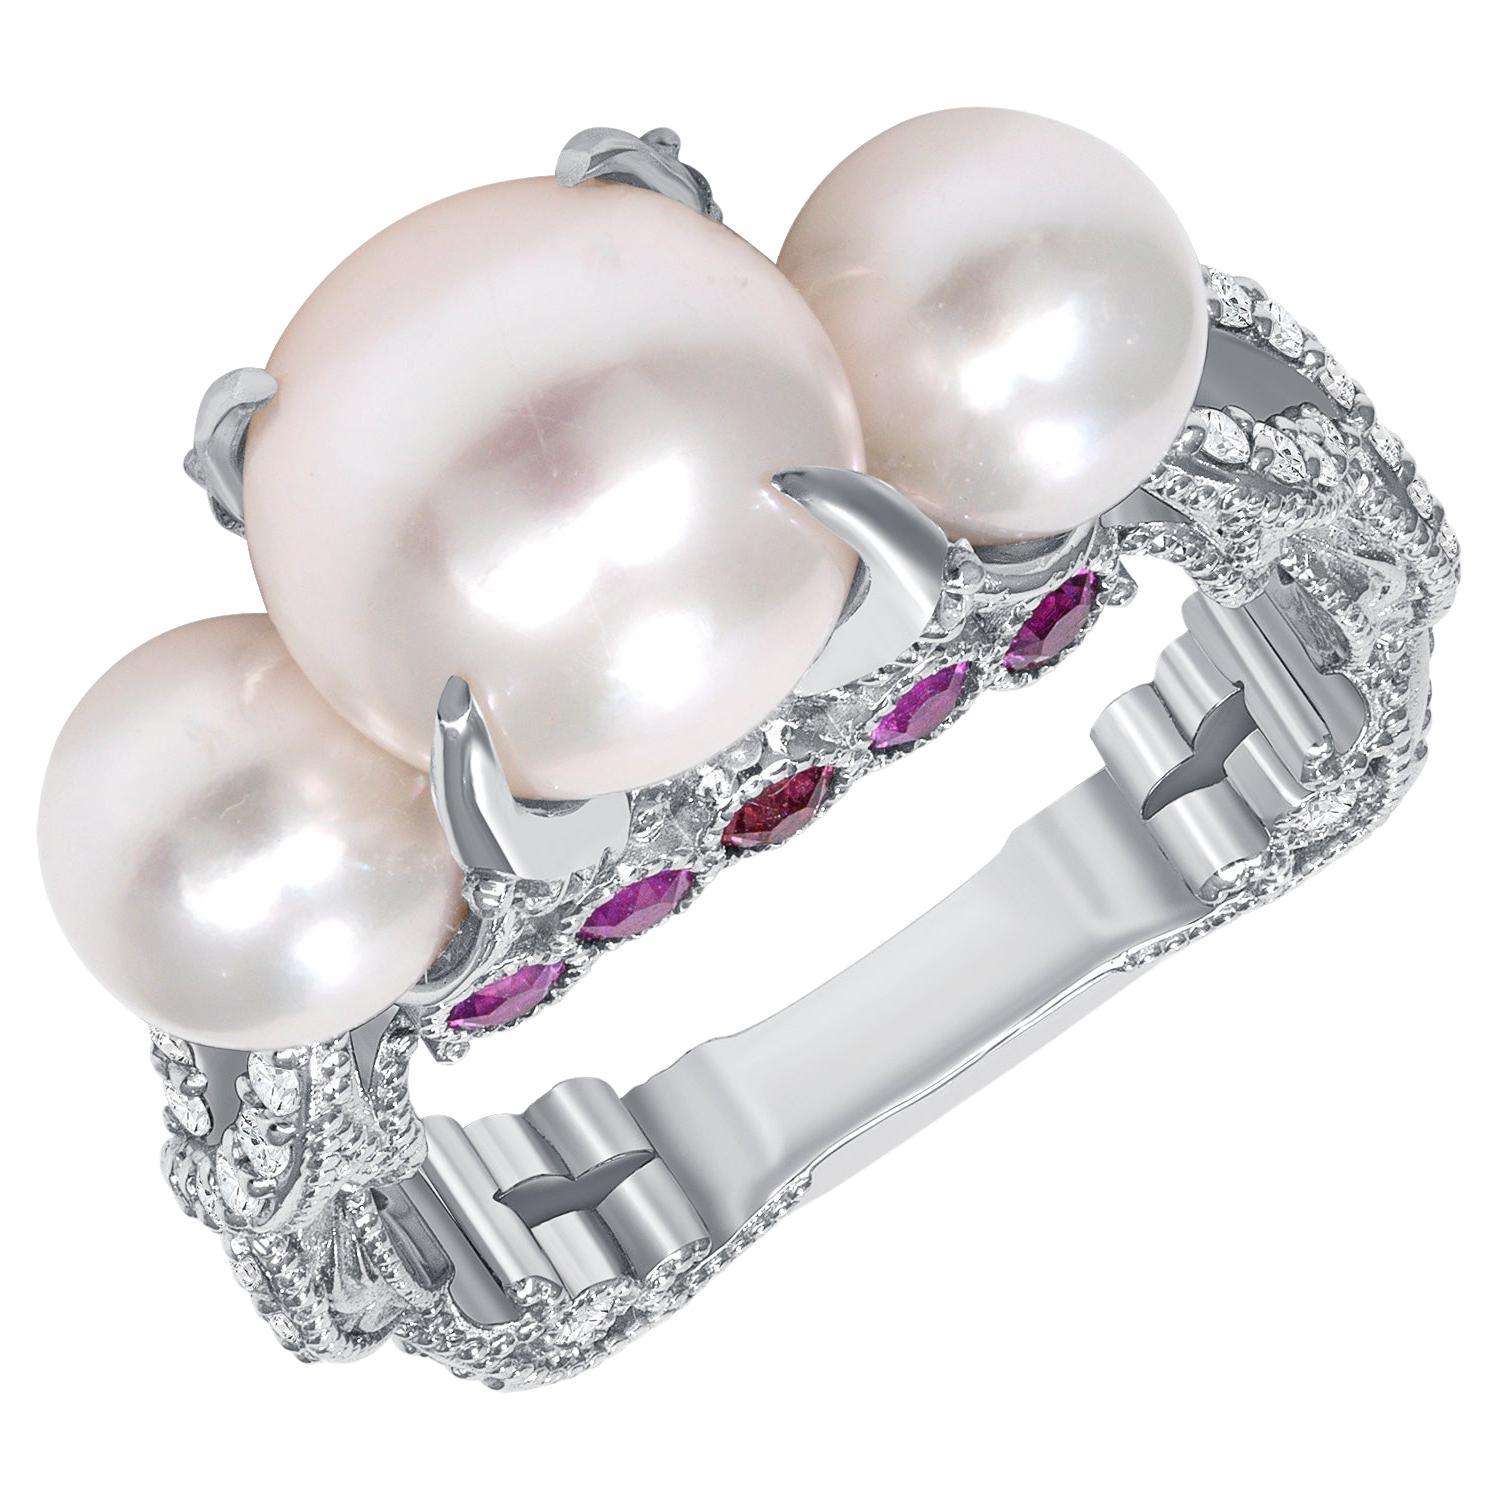 Designed by award-winning artist Brenda Smith, this size 7 Akoya cultured pearl ring has one 9-millimeter pearl and two 6-millimeter pearls hand cast and finished in 18-karat white gold. It also has 0.44 carats of hot pink sapphires on its sides and